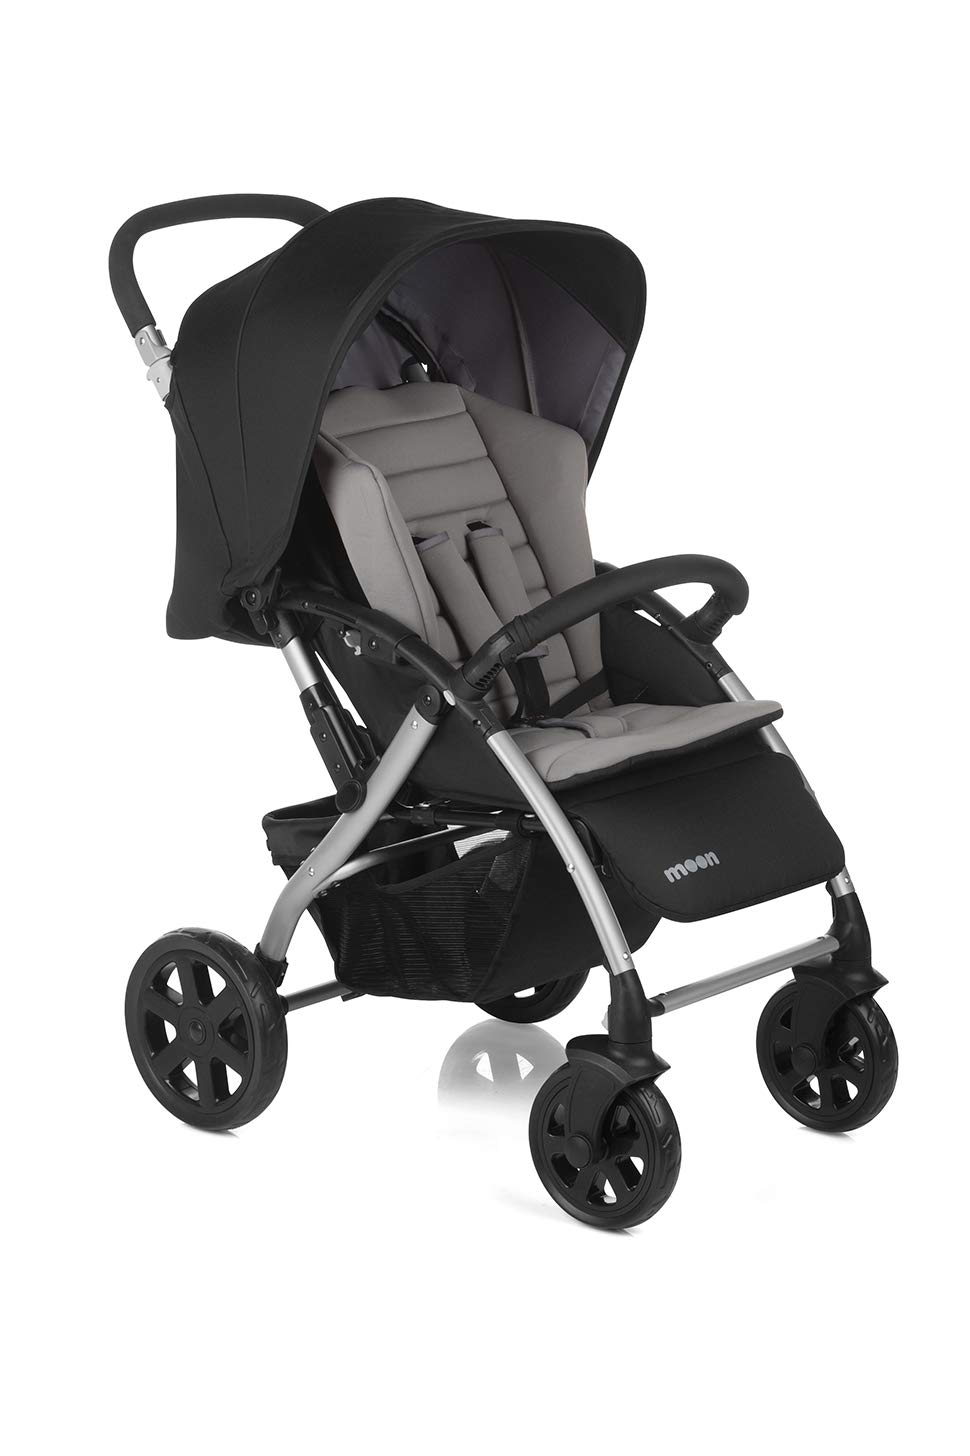 Nurse by Jané 8027 626 Moon Pro Pushchair, from 6 Months to 15 kg, Compact Folding, with Large Shopping Basket and Rain Cover, Grey, 9.2 kg